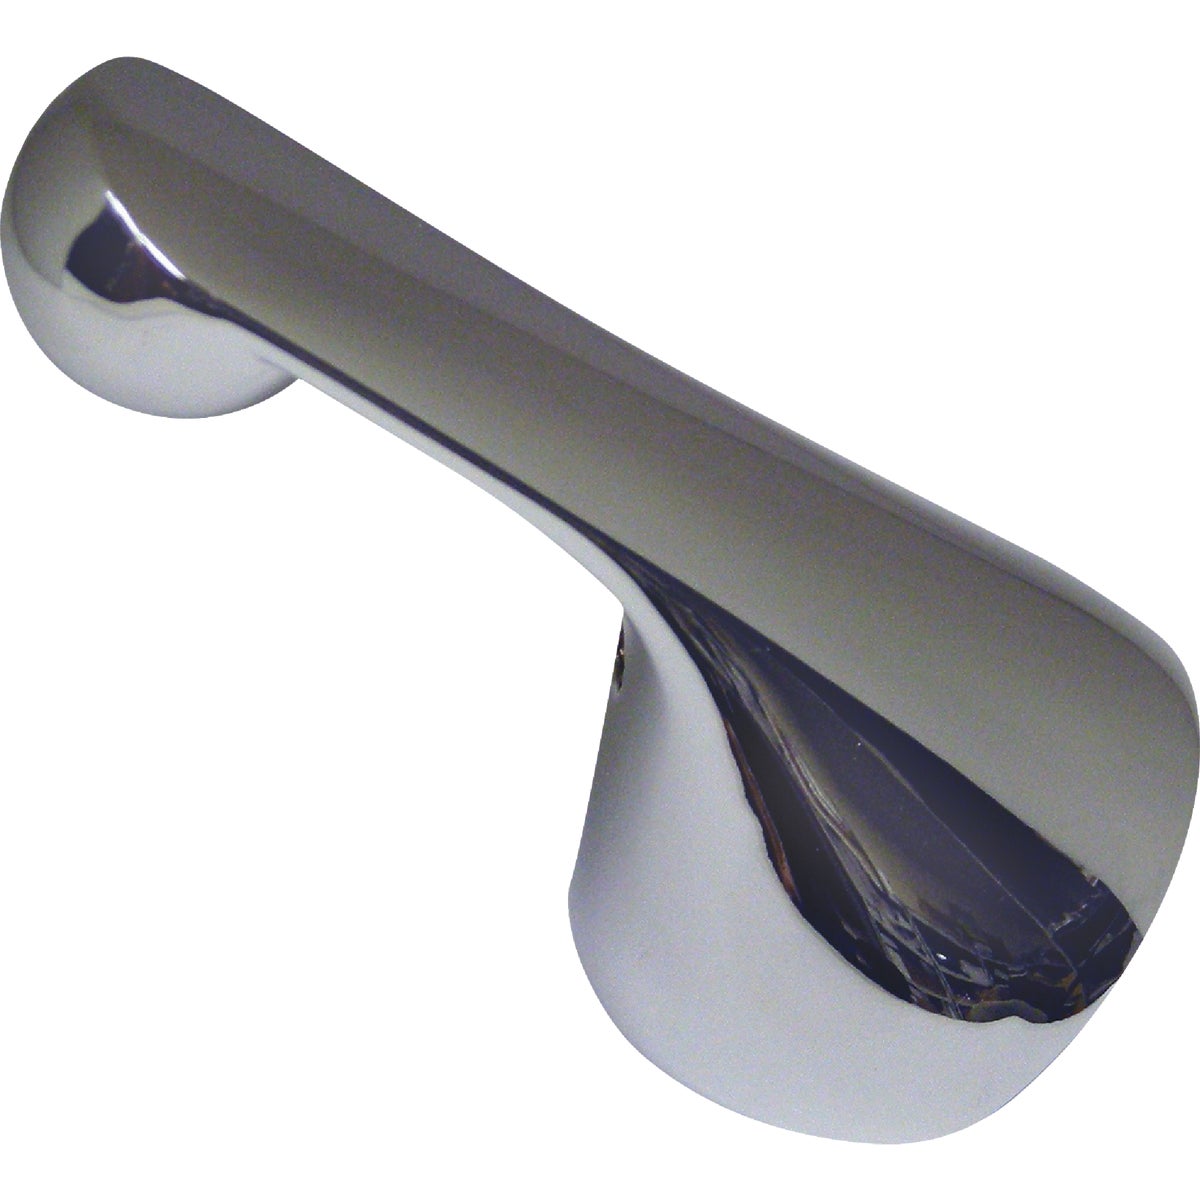 Item 453039, Metal lever style. Perfect upgrade for existing acrylic handles.